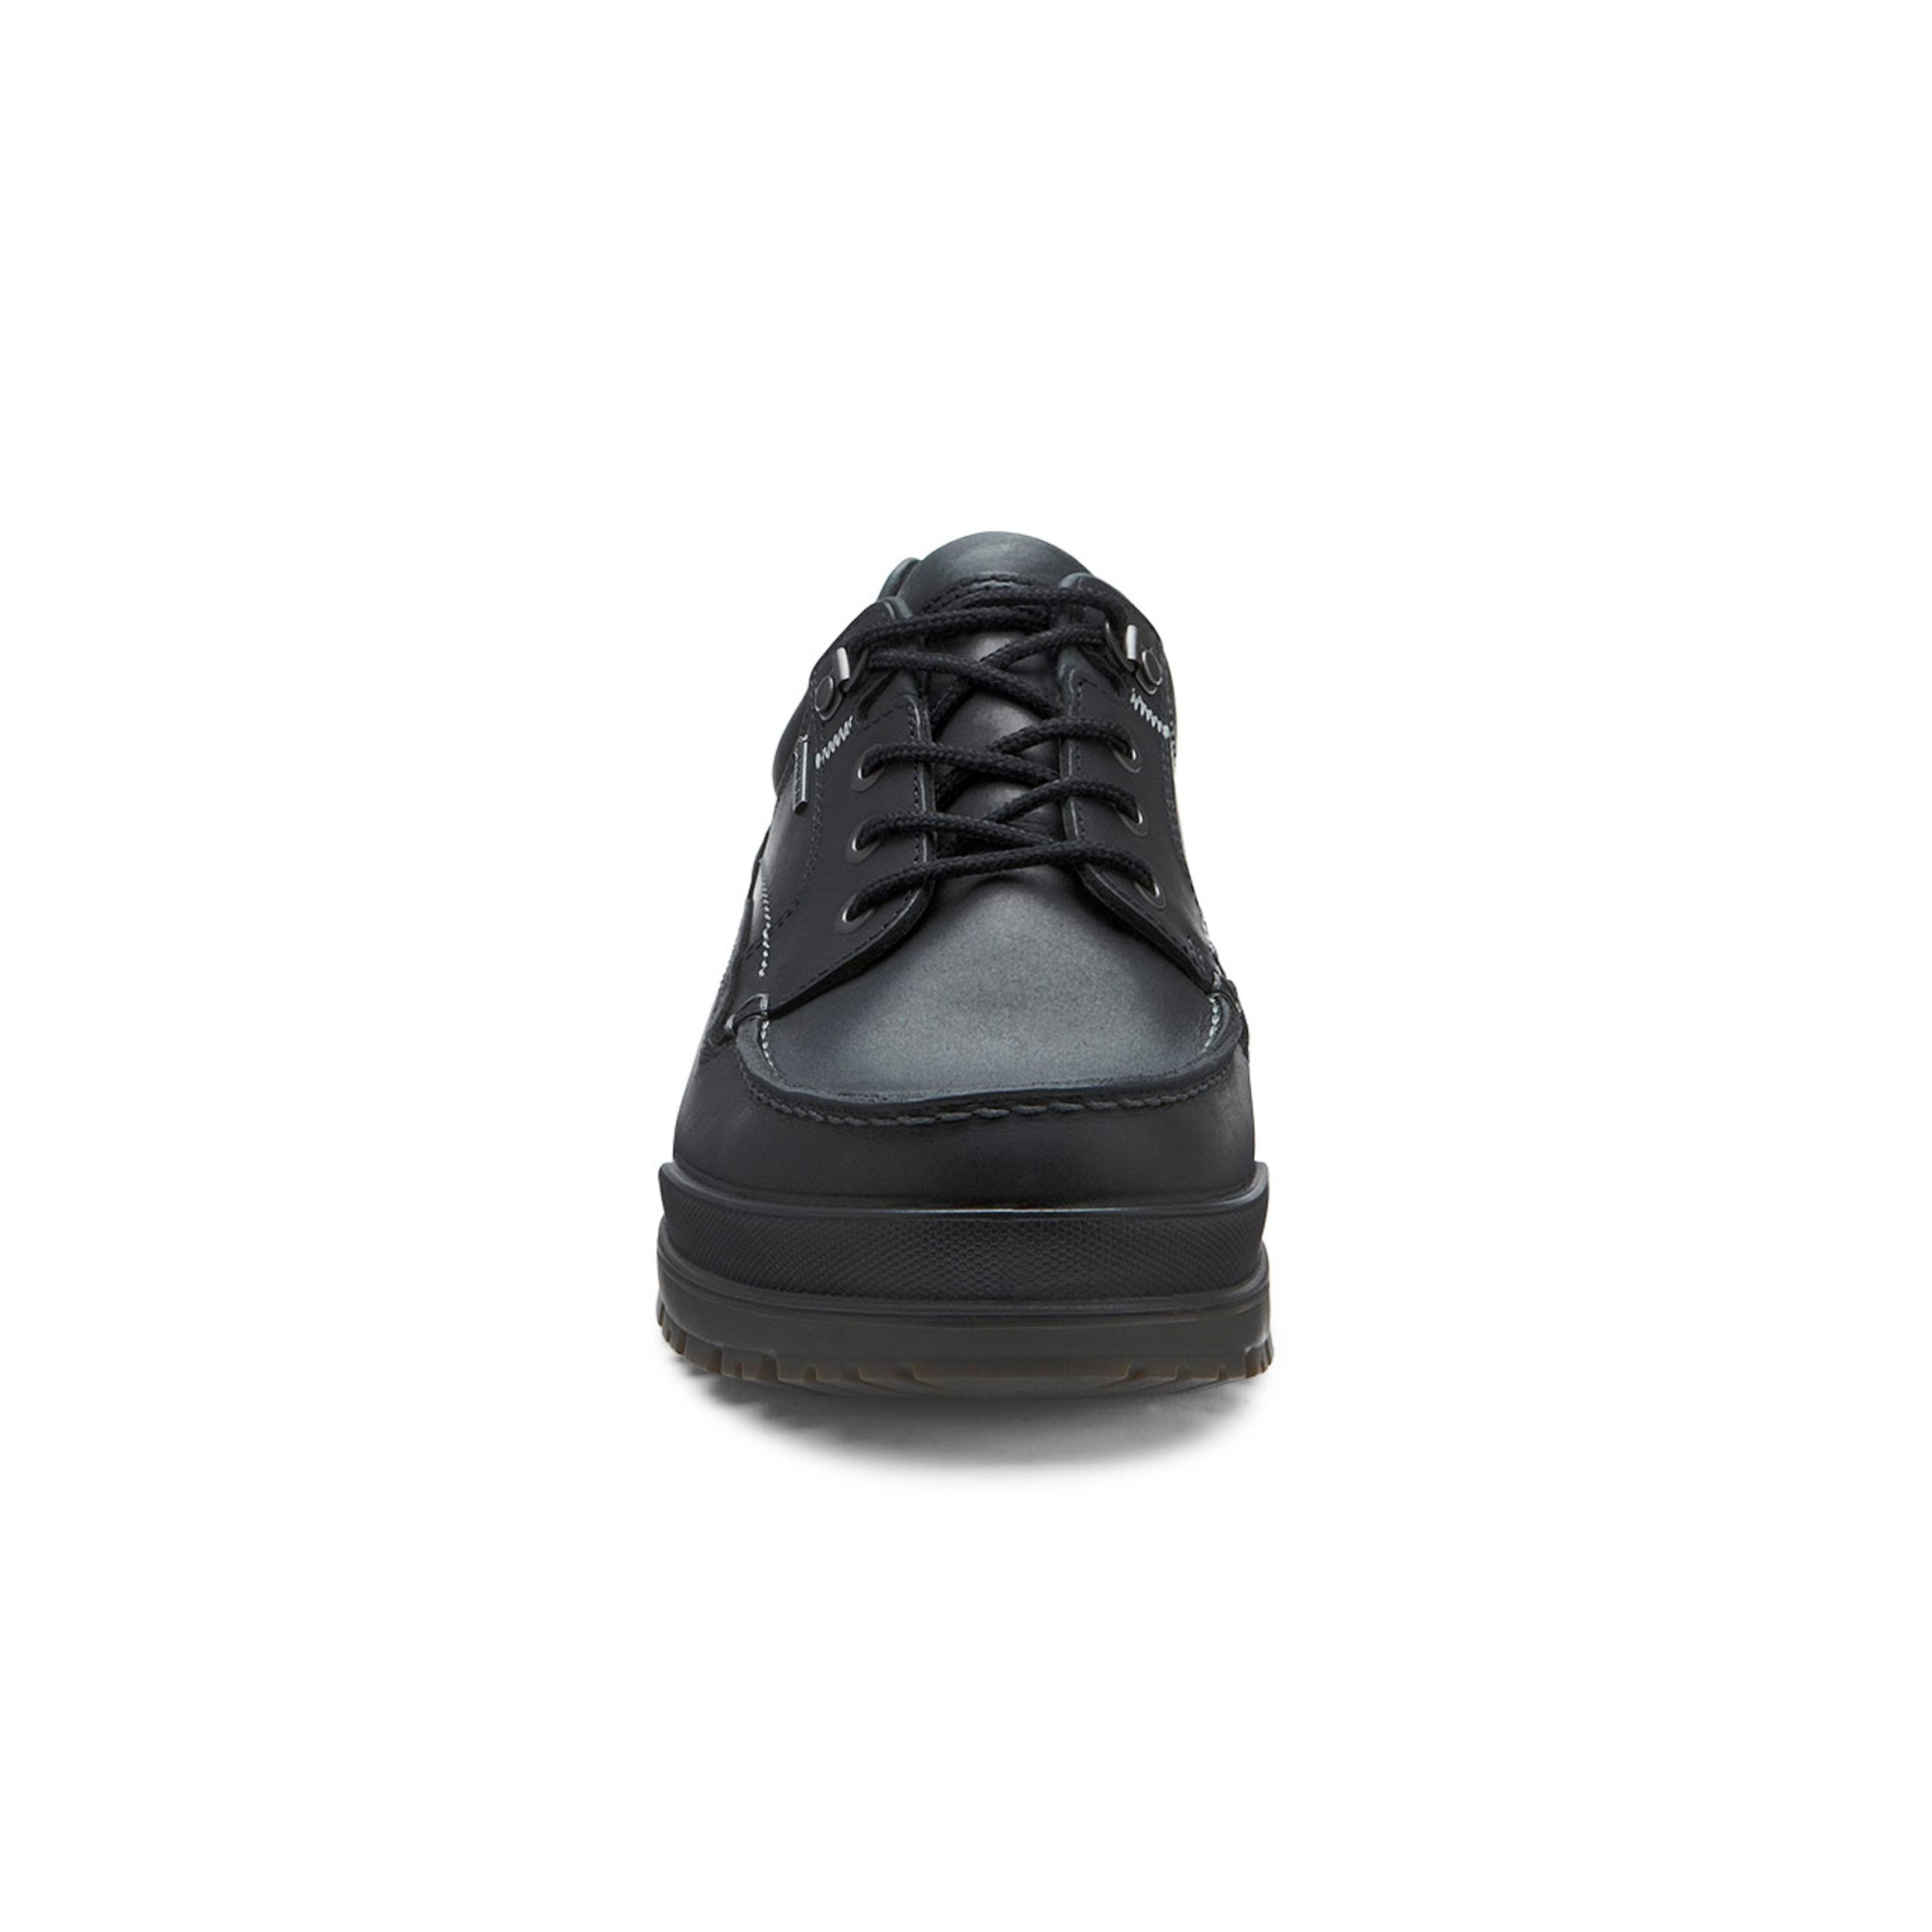 Ecco Track 6 GTX Moc Toe Lo 40 - - Veryk Mall - Veryk Mall, many product, quick response, safe your money!